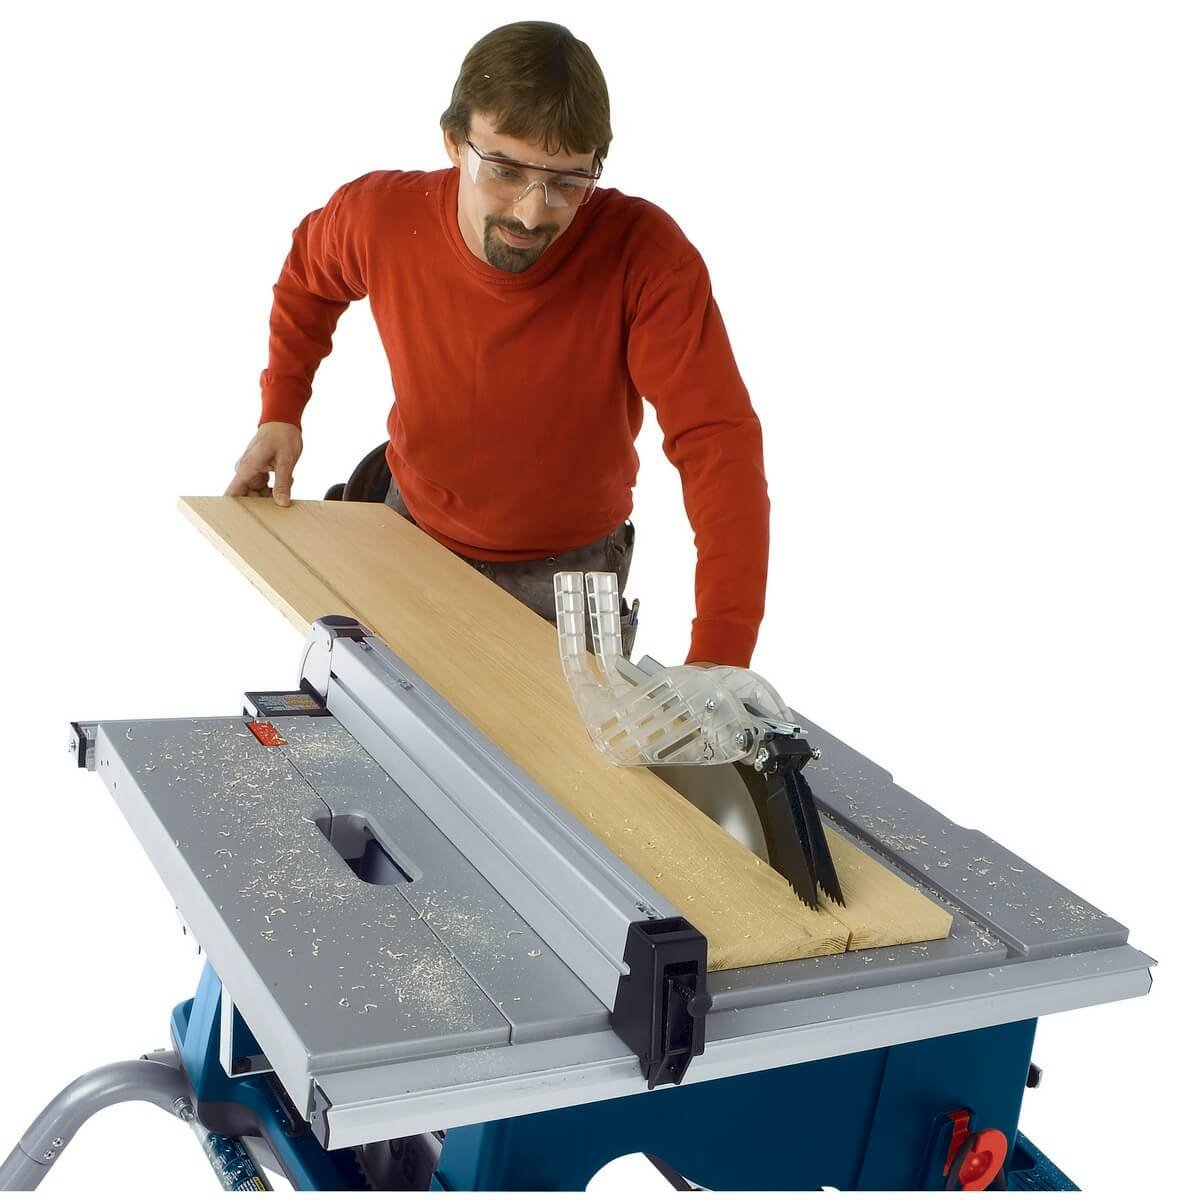 Bosch 4100-09 10-Inch Worksite Table Saw with Gravity-Rise Stand